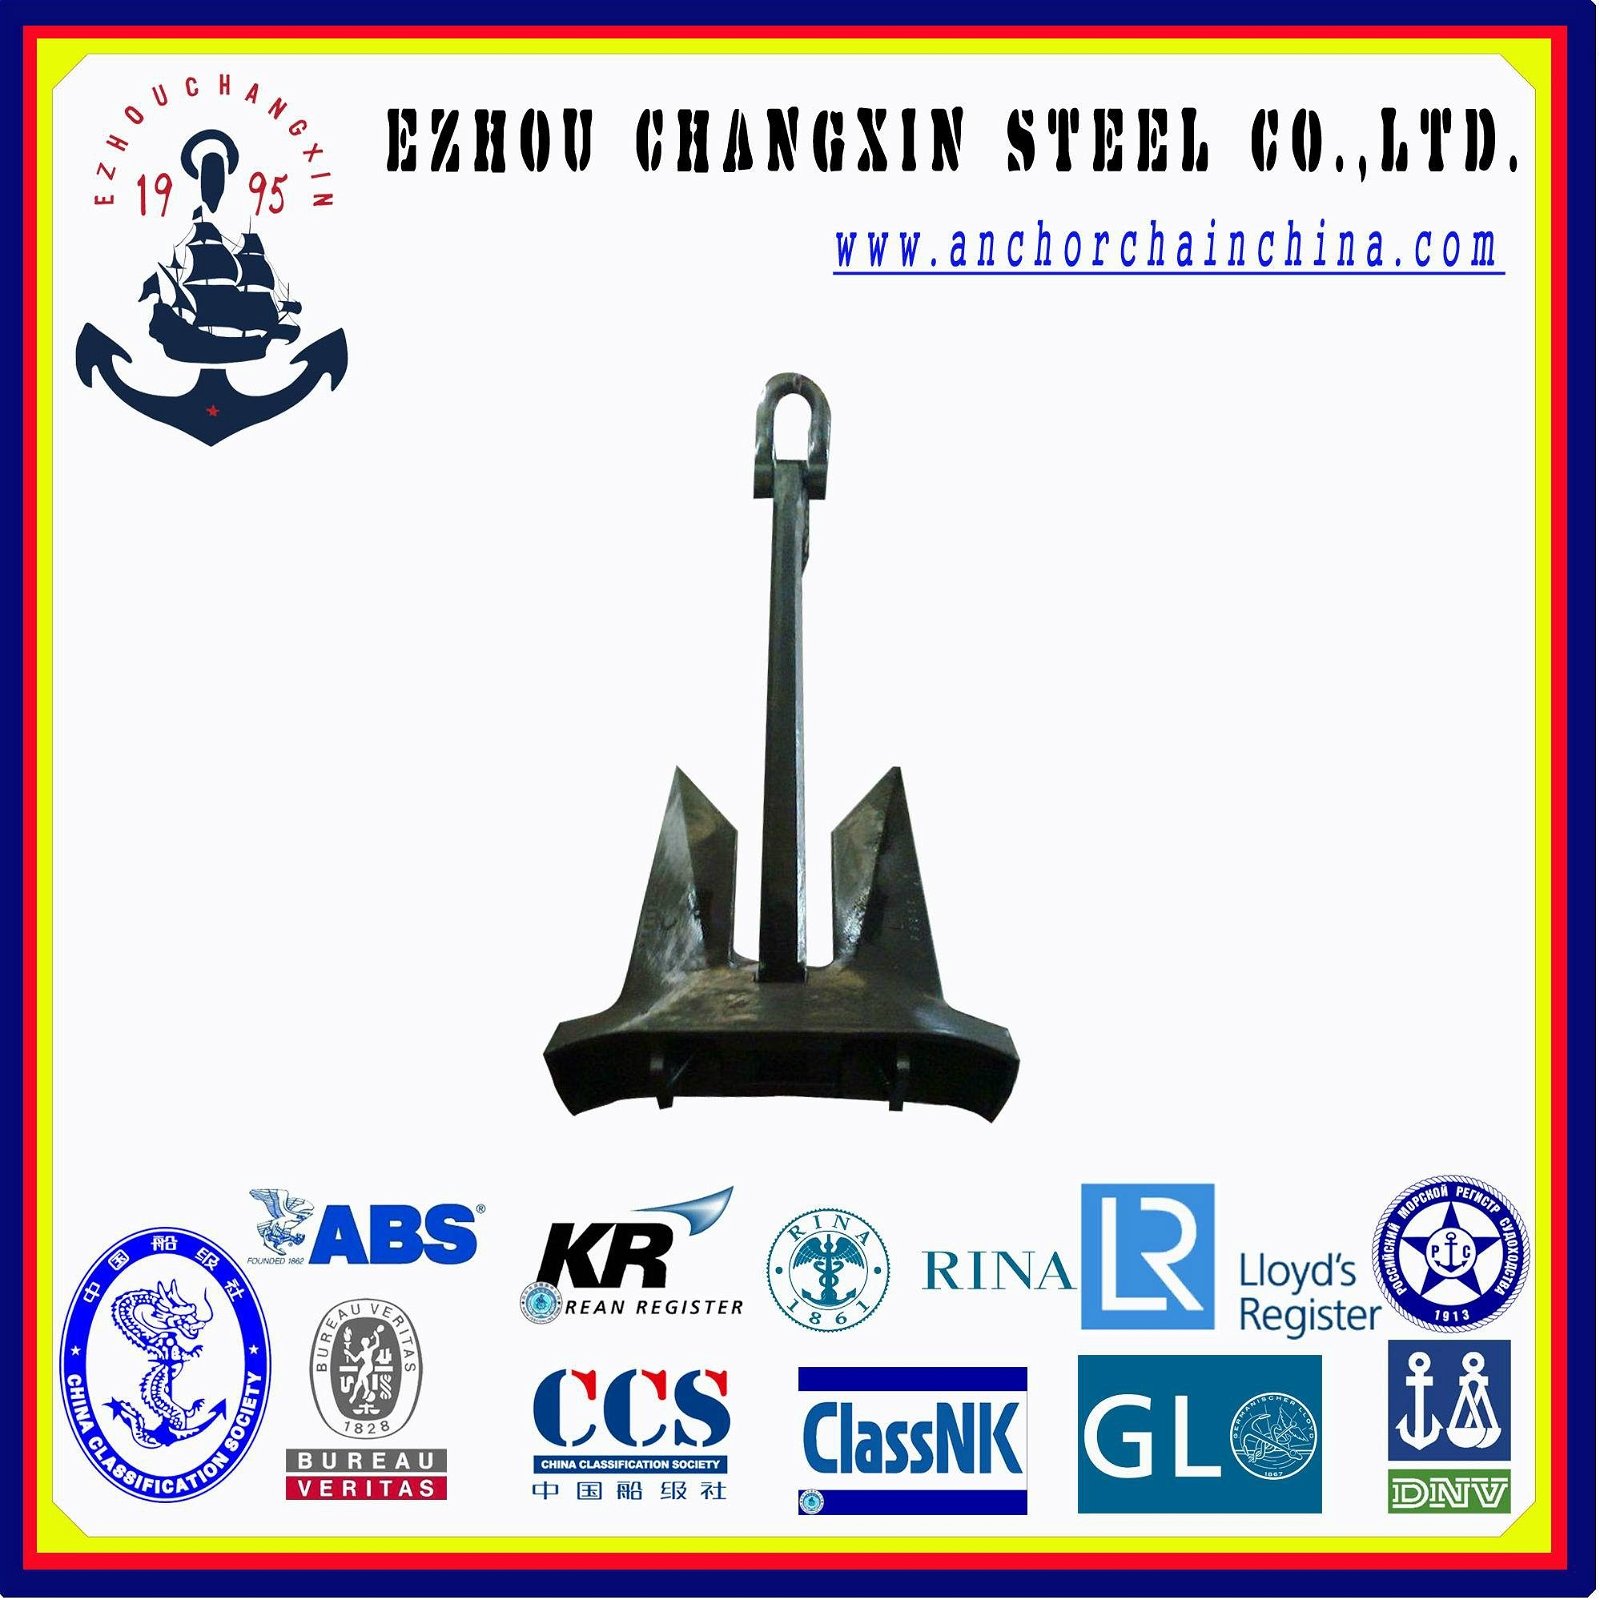 The worldsale anchor service AC-14 HHP STOCKLESS MARINE ANCHOR    with delivery  2